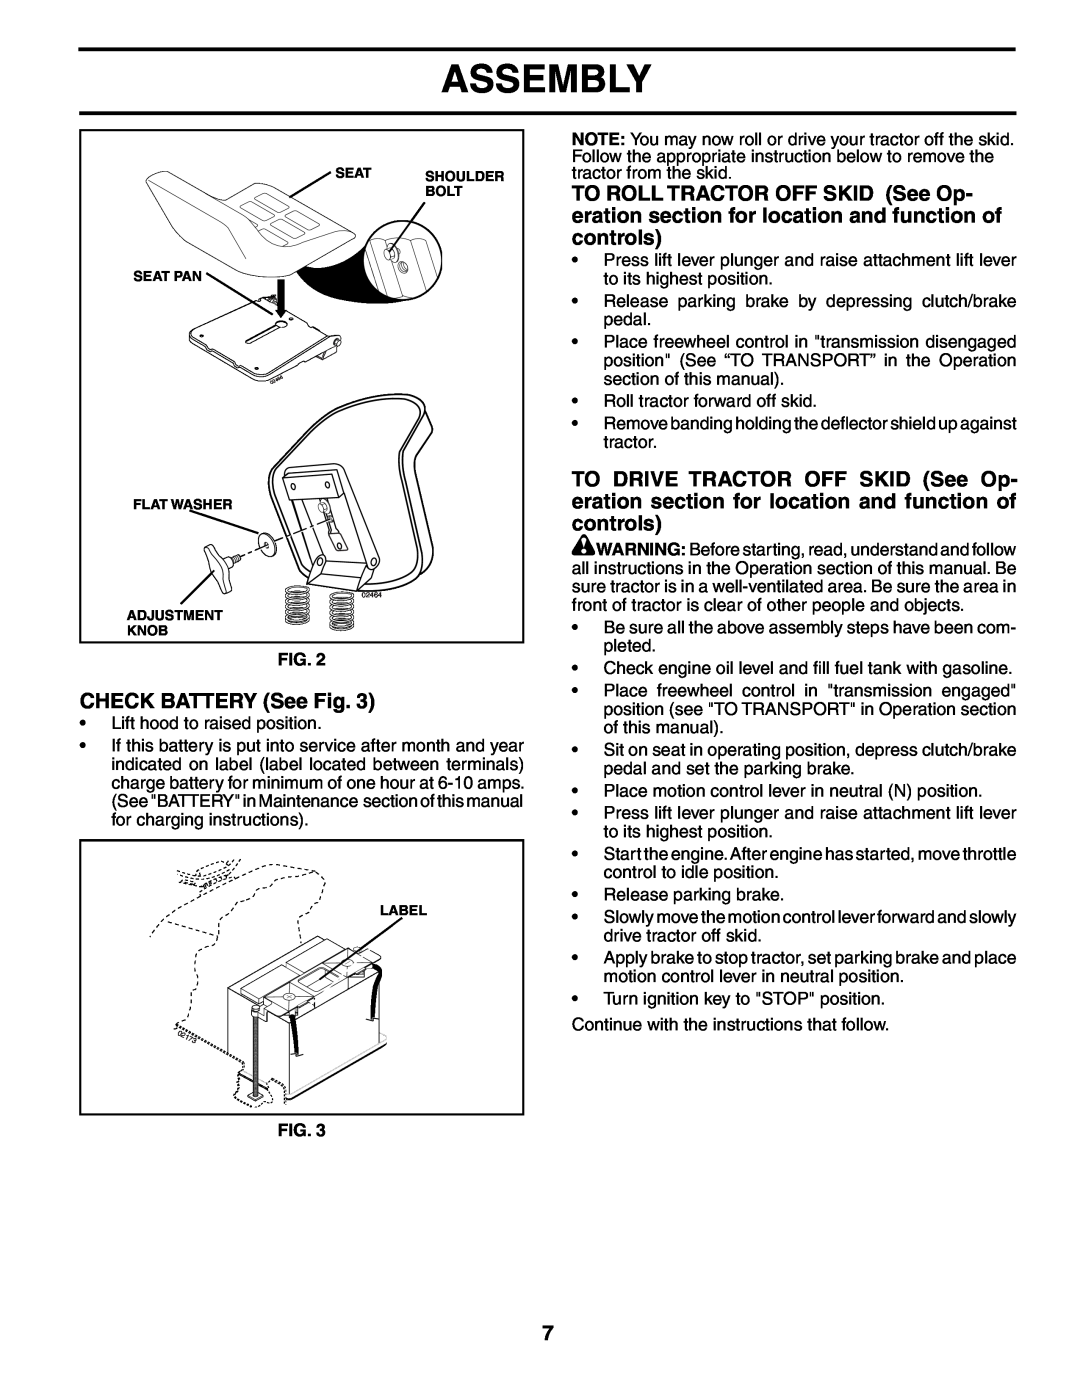 Poulan 195021 manual CHECK BATTERY See Fig, Assembly 